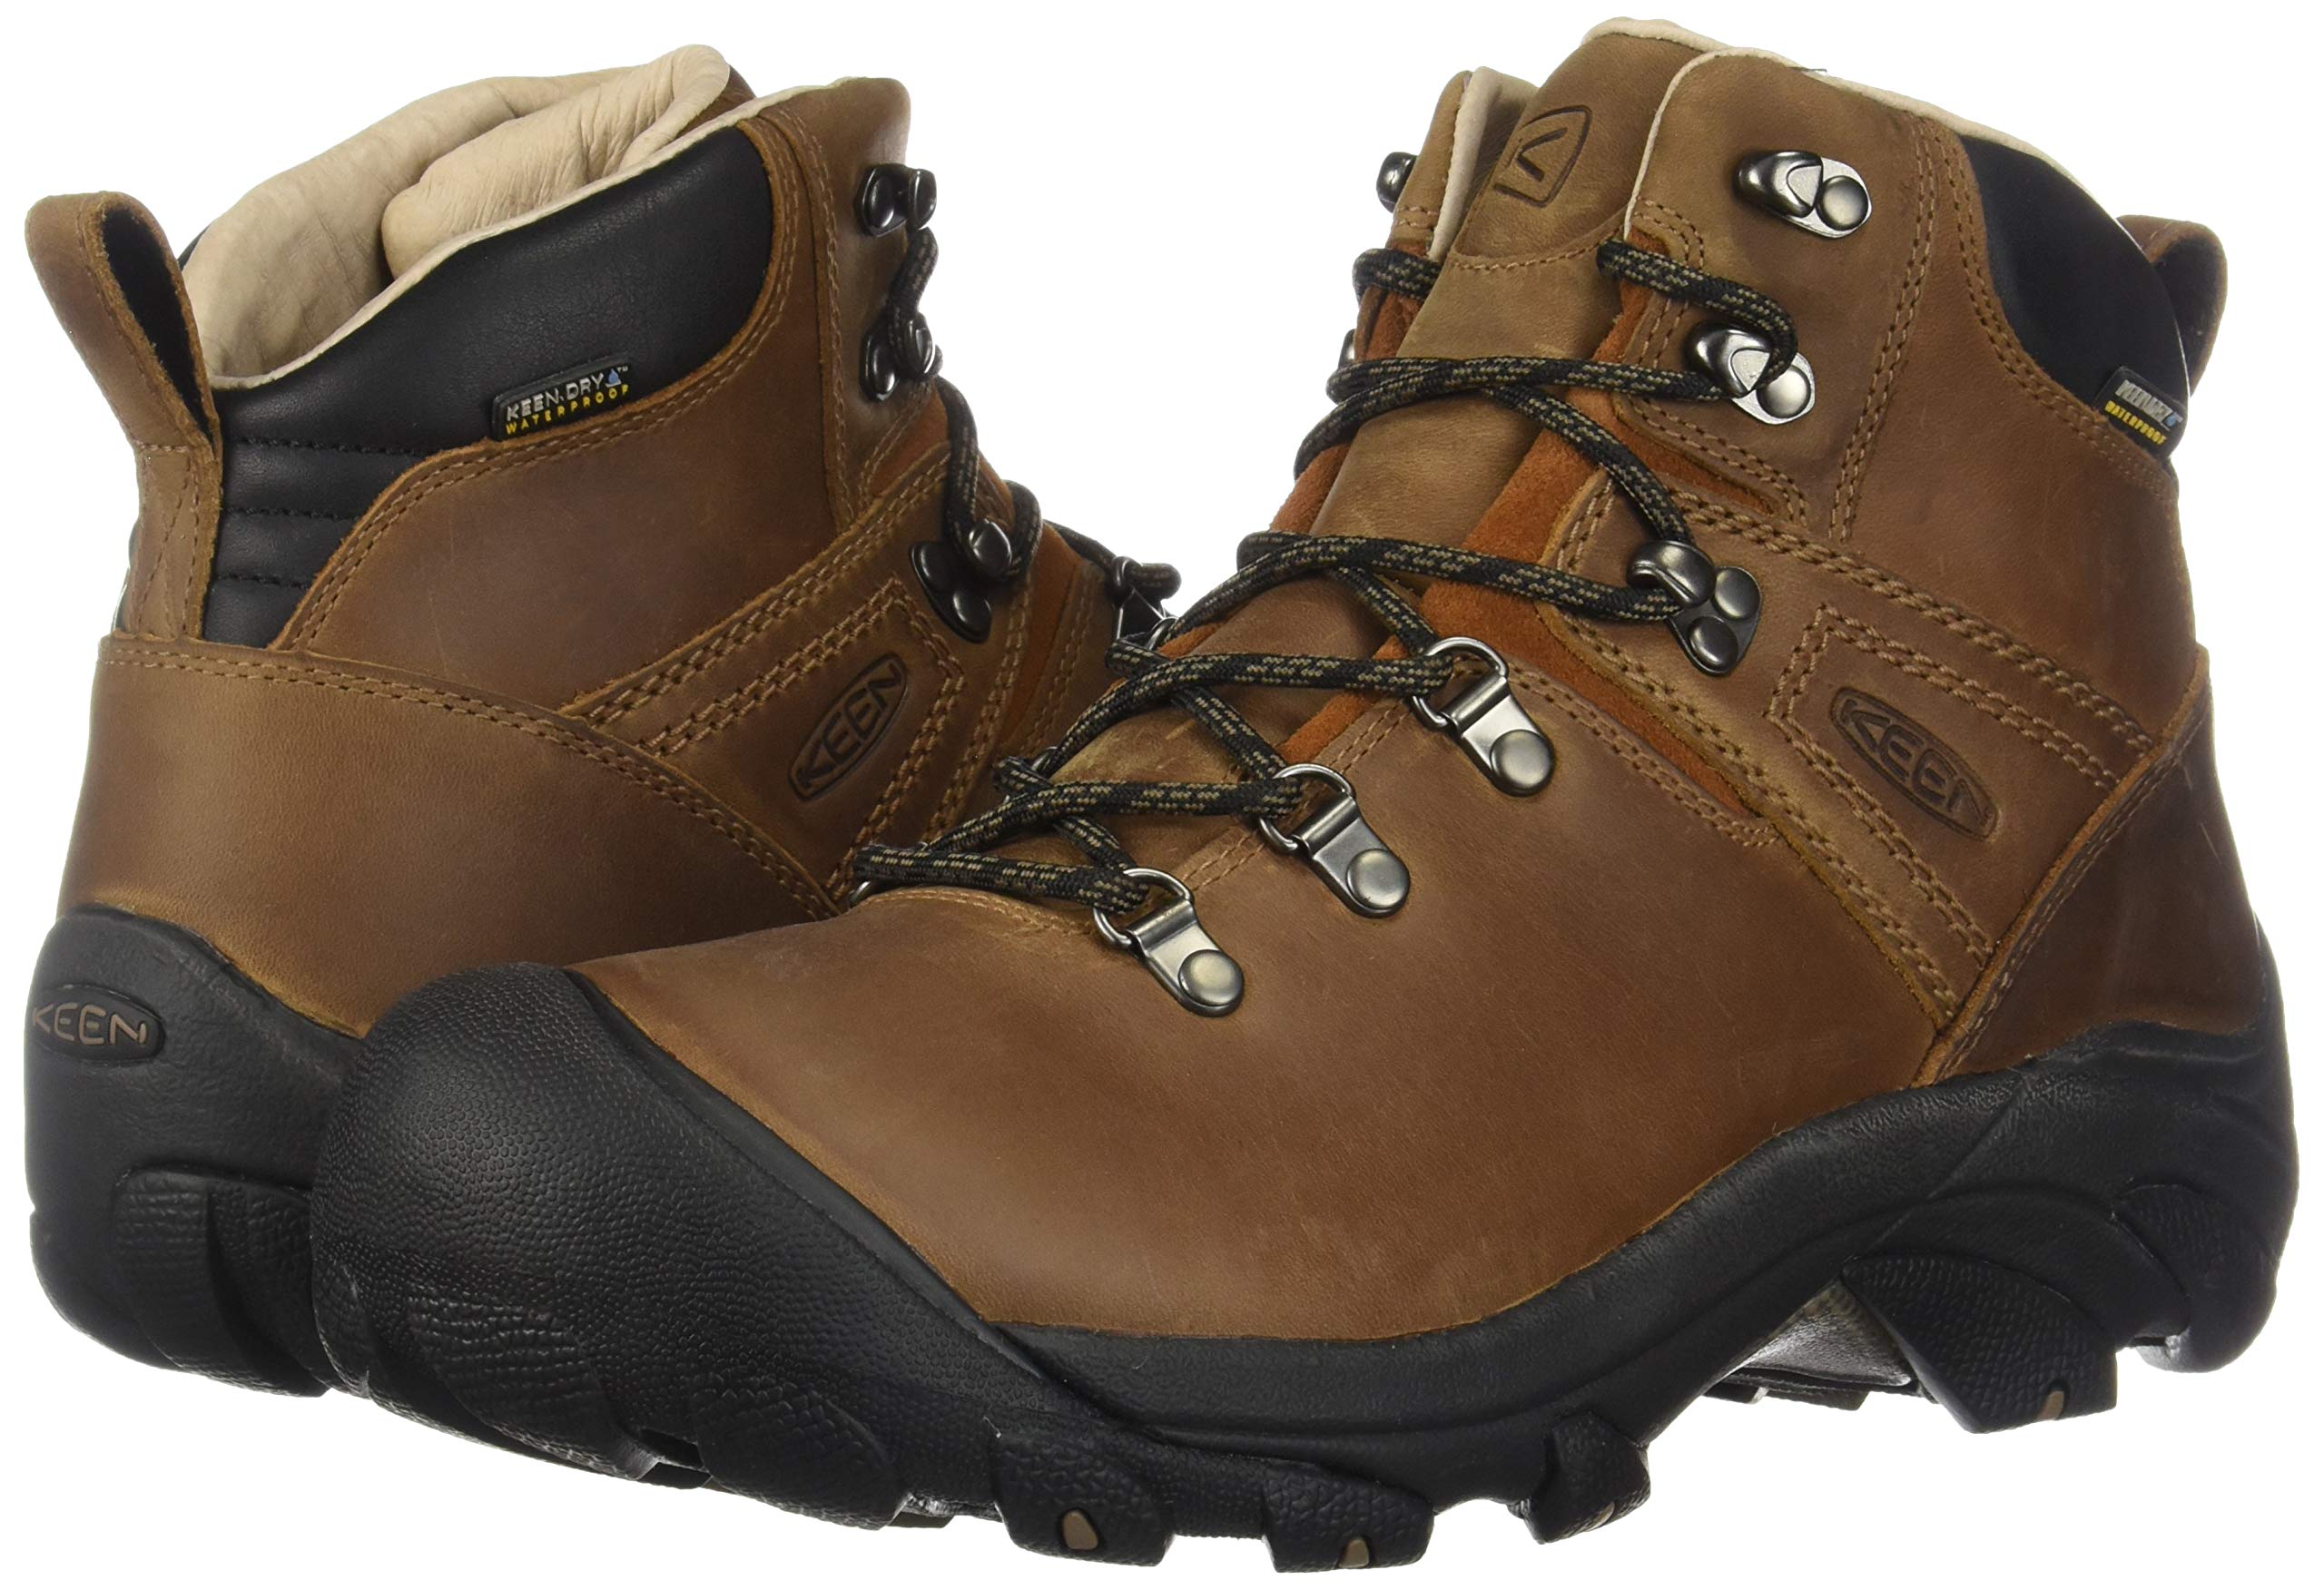 KEEN Men's Pyrenees Mid Height Waterproof Hiking Boots, Syrup, 13